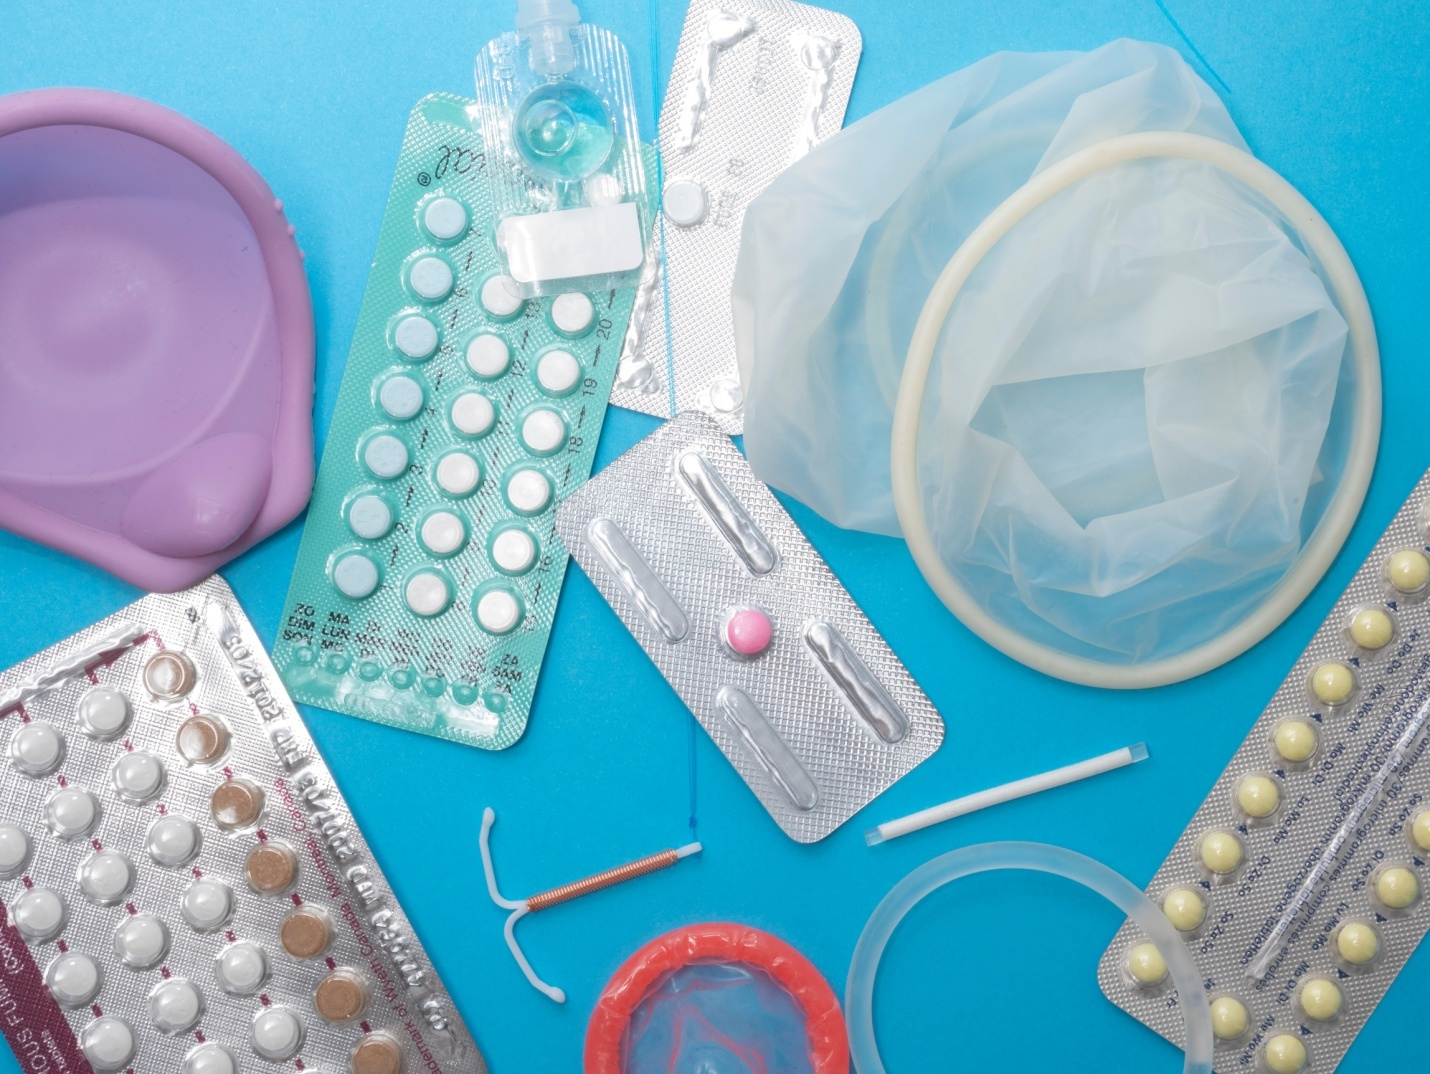 Reproductive health supplies placed on a table among prescription drugs